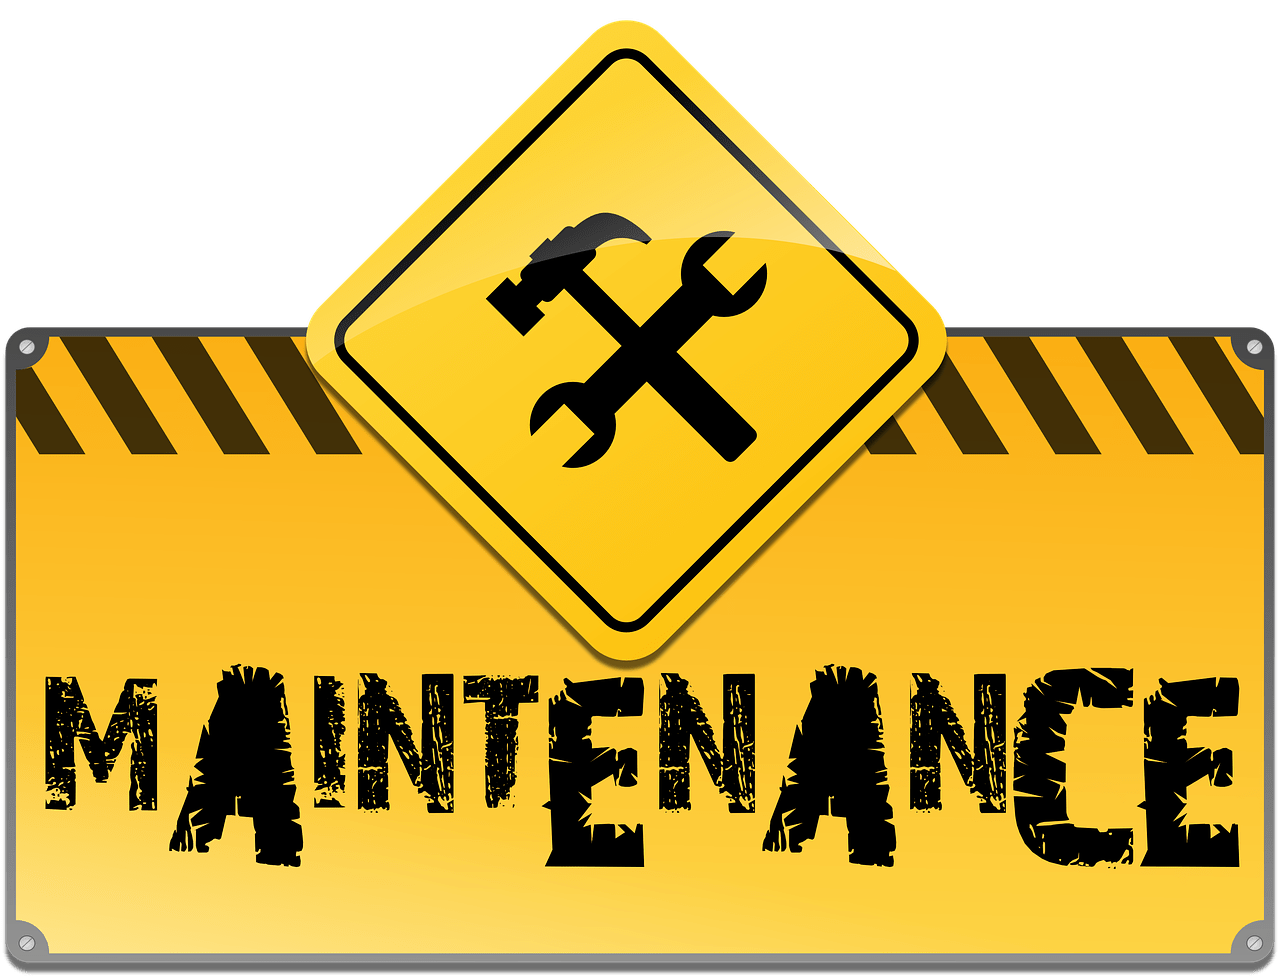 What maintenance is recommended for driveway longevity